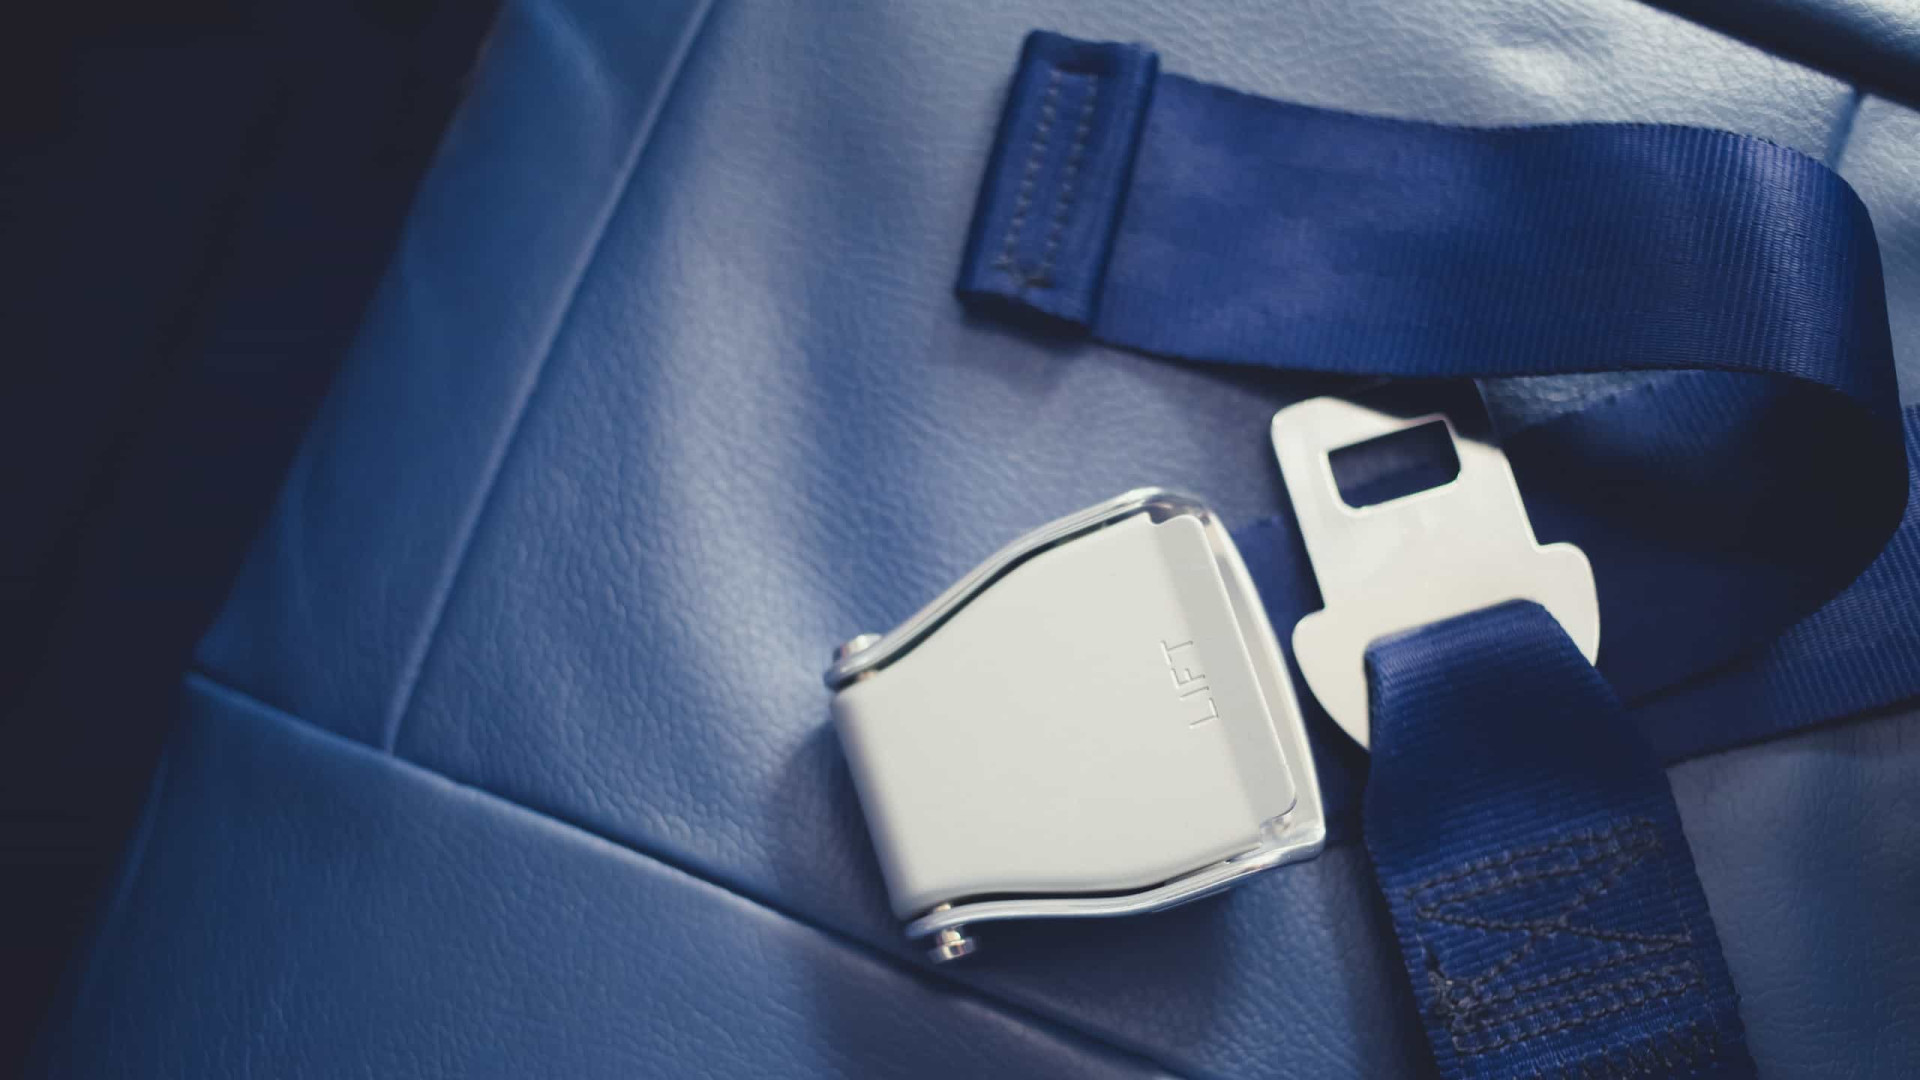 <p>In case of turbulence, the seat belt light will turn on, and flight attendants may come to check that everyone is buckled up. If you're buckled beneath your blanket where they can't see it, they will wake you up to check.</p><p>You may also like:<a href="https://www.starsinsider.com/n/255526?utm_source=msn.com&utm_medium=display&utm_campaign=referral_description&utm_content=500296v1en-us"> Wildest Aussie conspiracy theories</a></p>